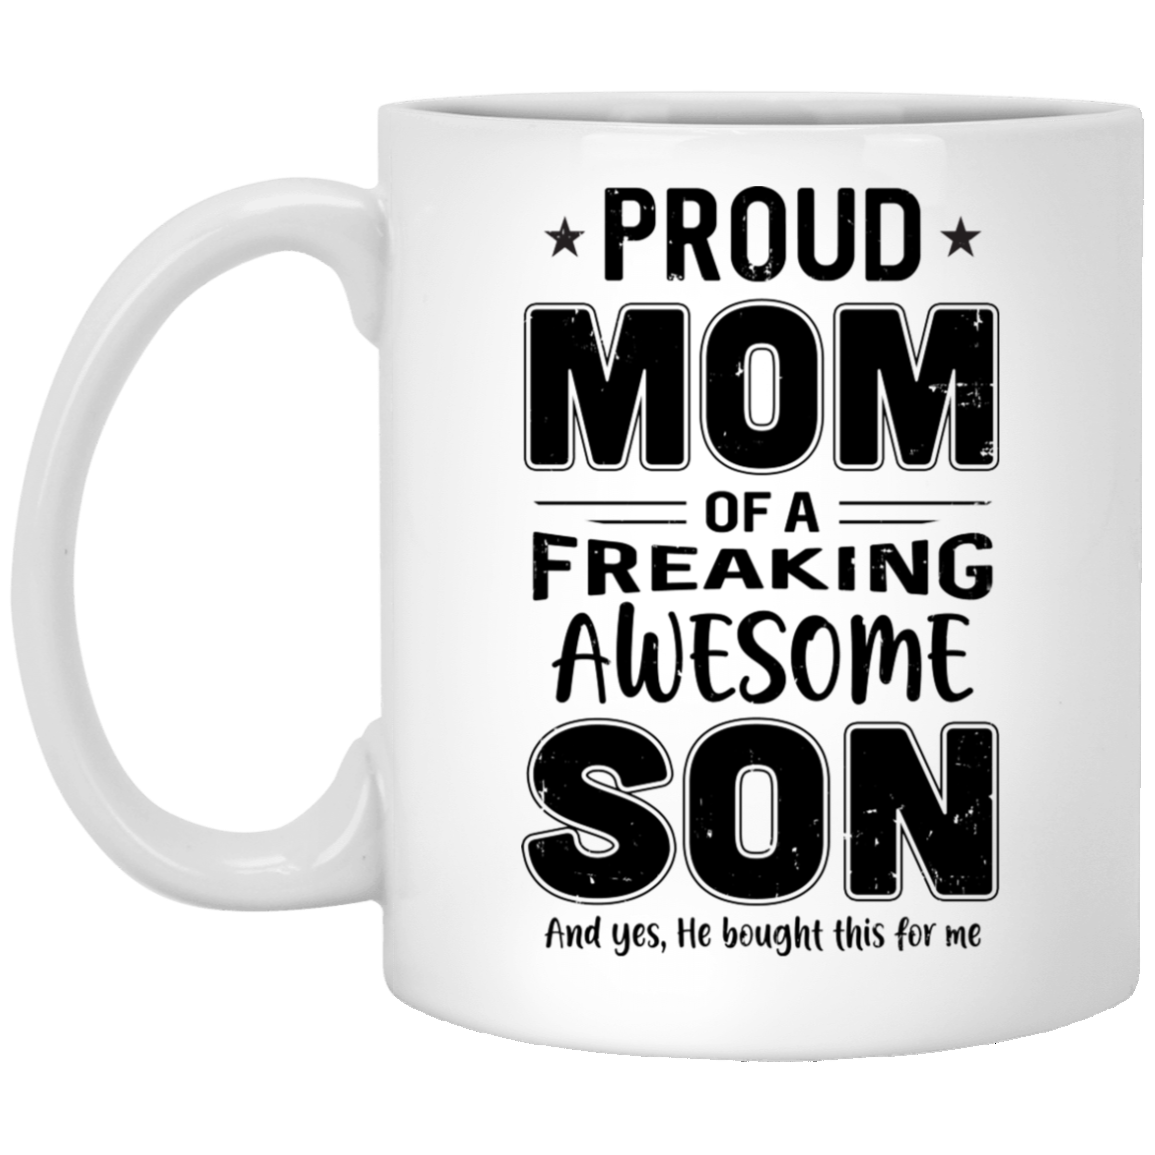 Funny Mother's Day Mugs - so many great gift ideas!